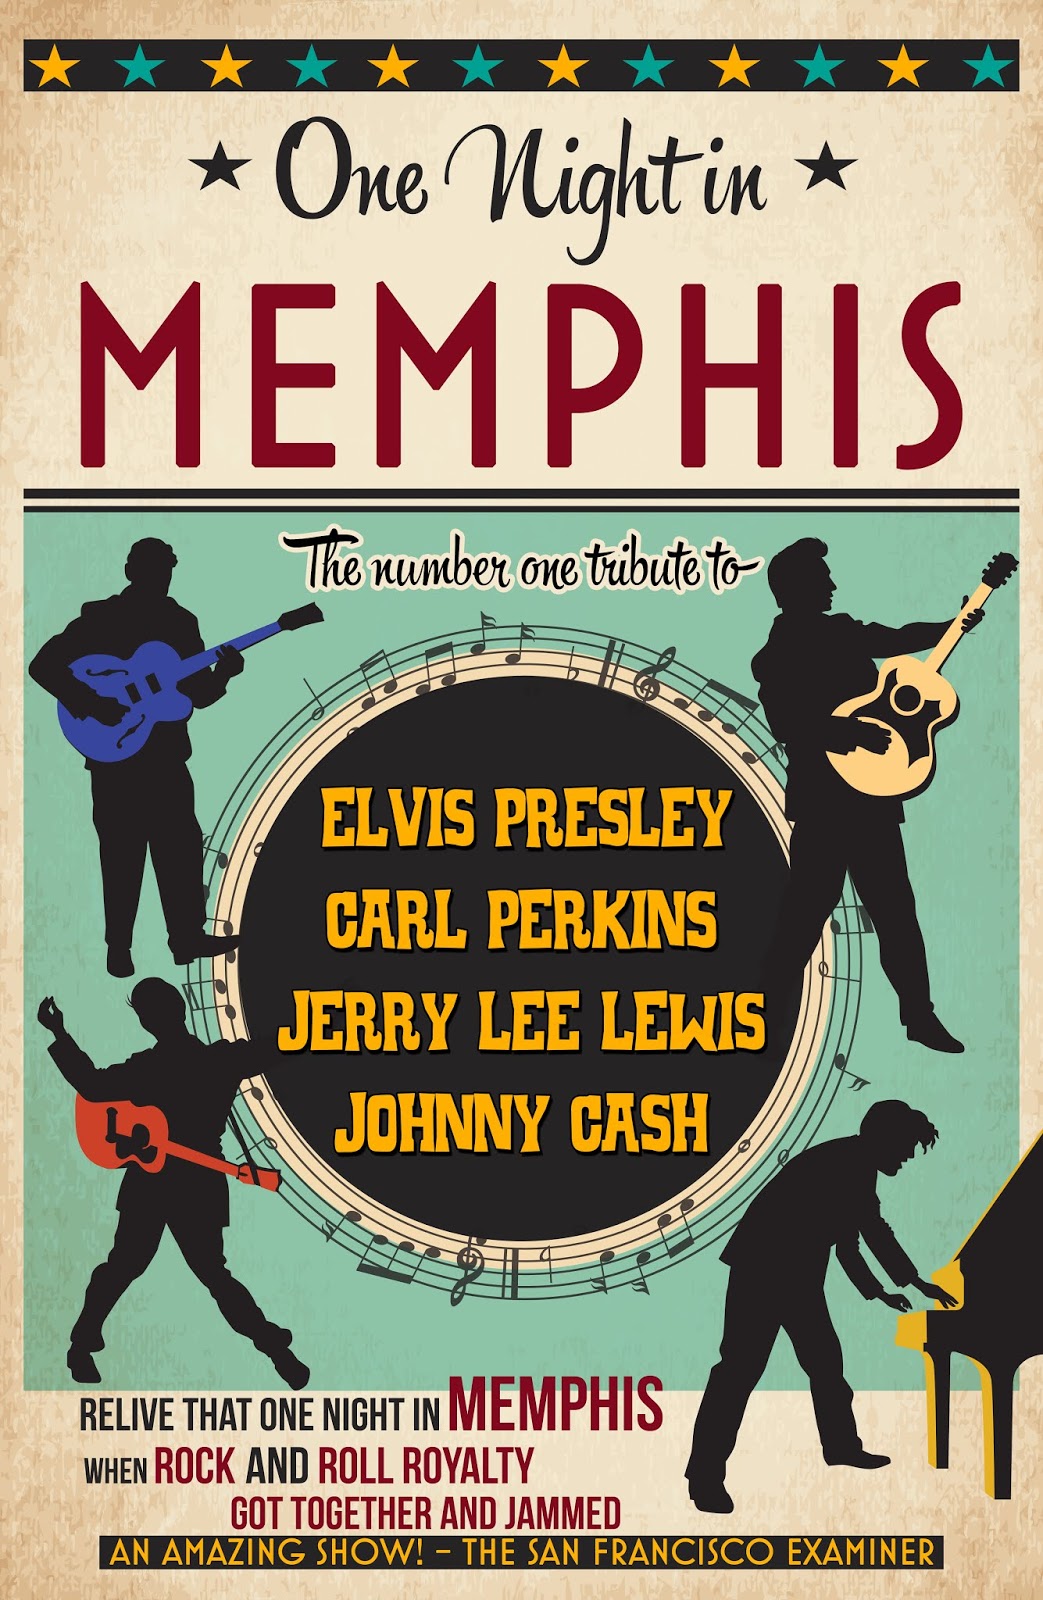 PHX Stages ONE NIGHT IN MEMPHIS Madison Center for the Arts February 9